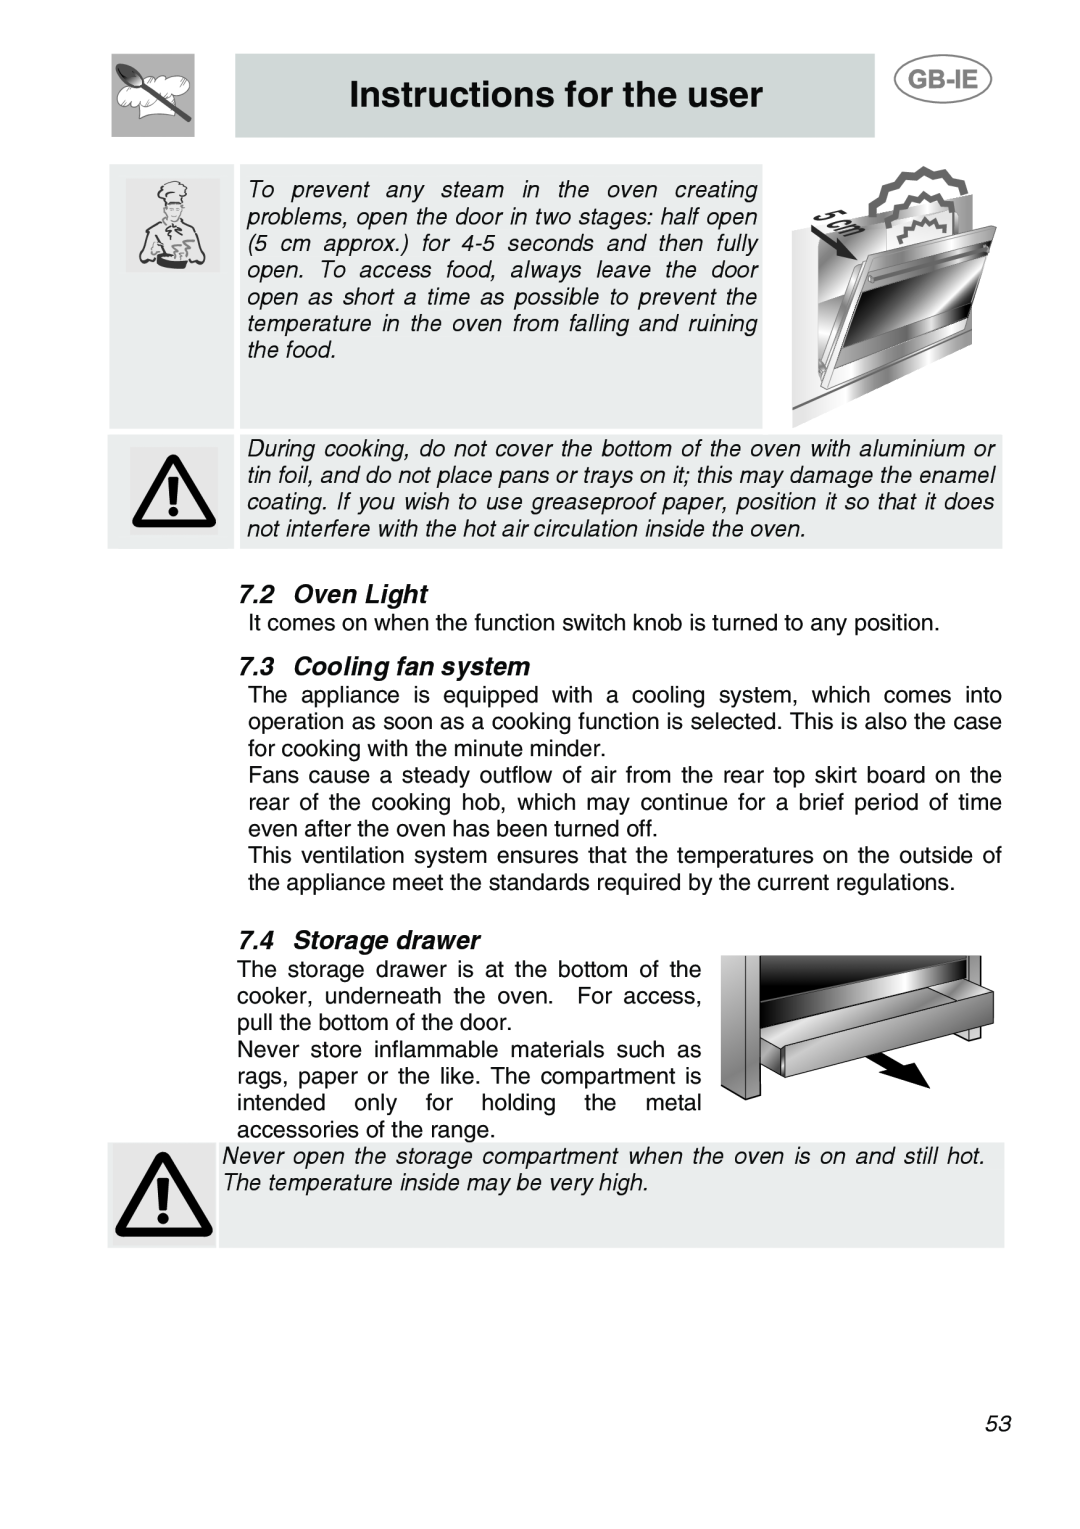 Smeg A1-6 manual Oven Light, Cooling fan system, Storage drawer, Instructions for the user 